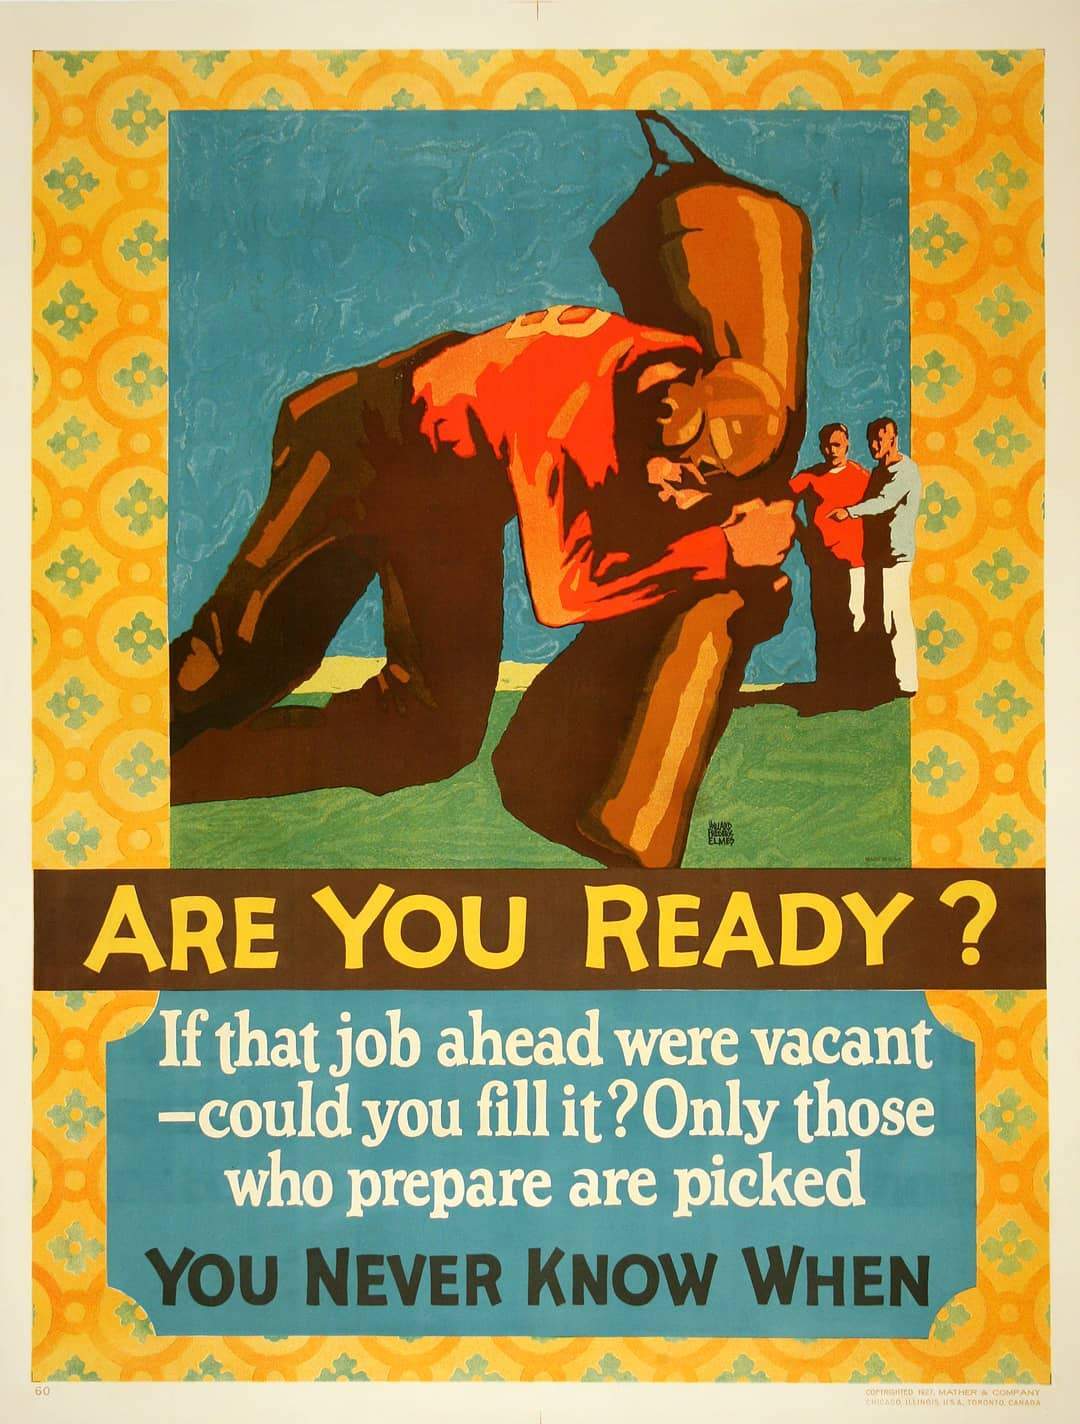 Original Mather Work Incentive Poster 1927 by Elmes - Are You Ready? Football Player